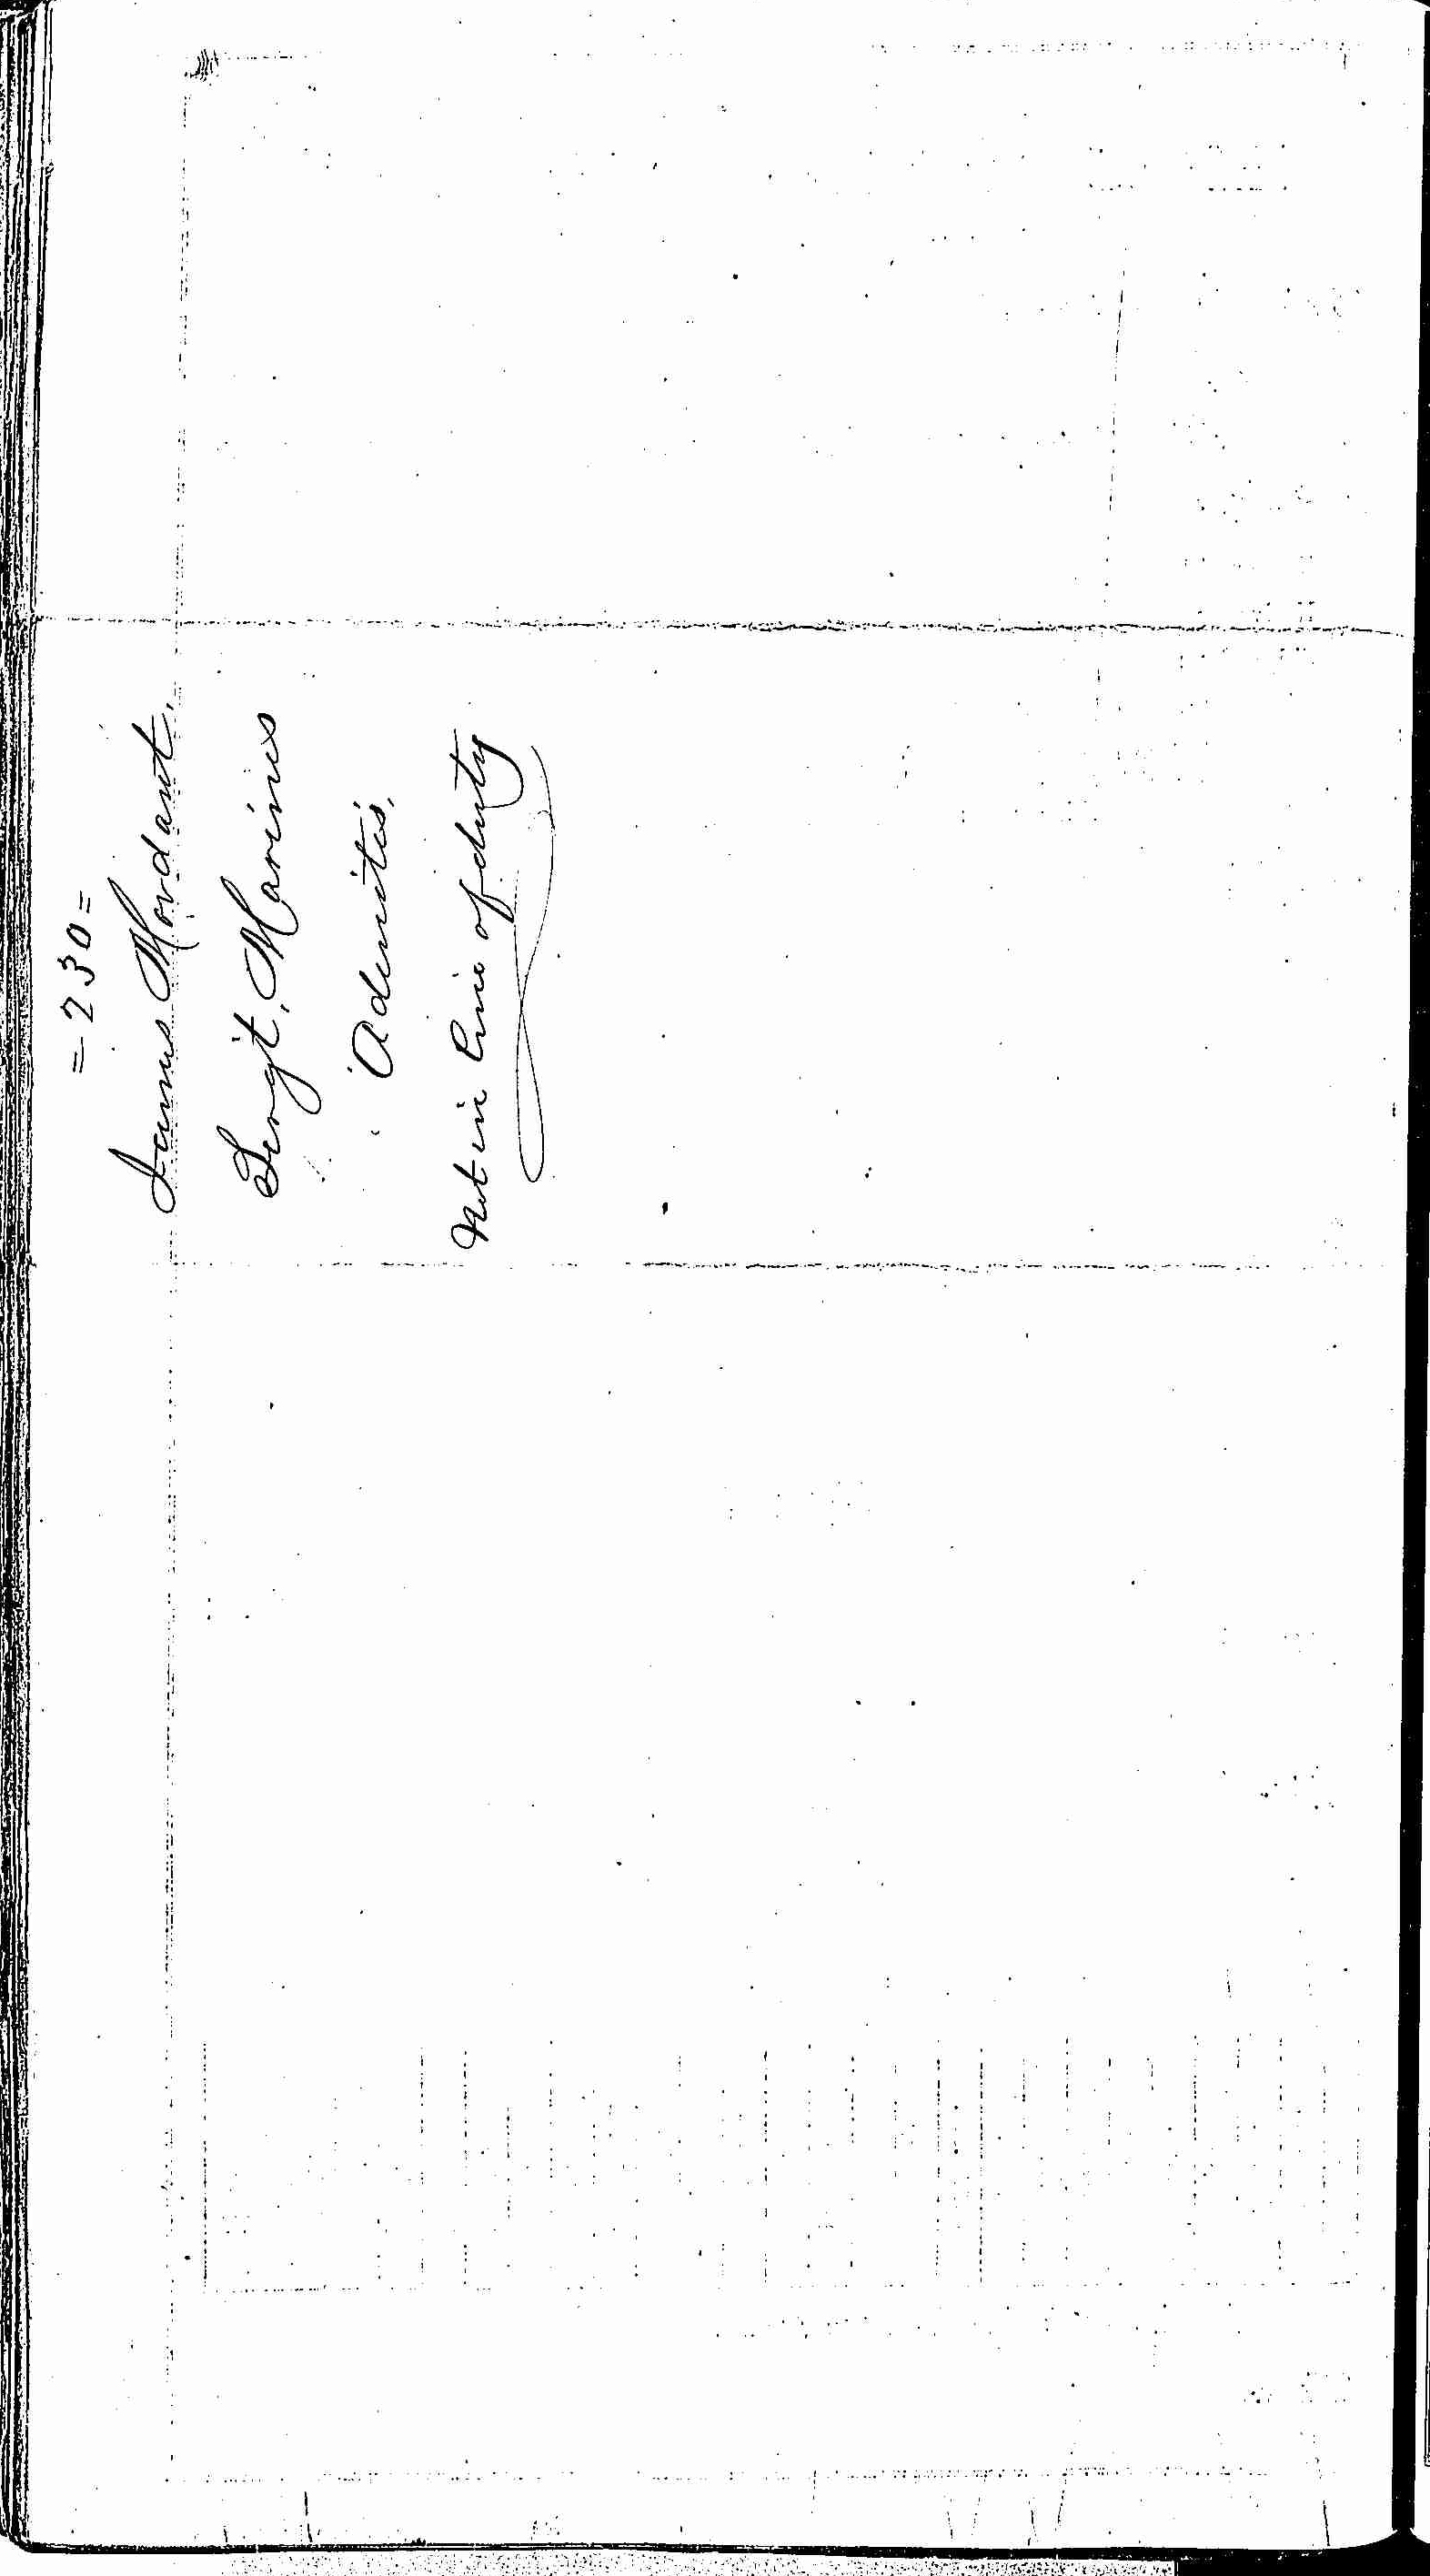 Entry for James Mordaunt (second admission page 2 of 2) in the log Hospital Tickets and Case Papers - Naval Hospital - Washington, D.C. - 1866-68